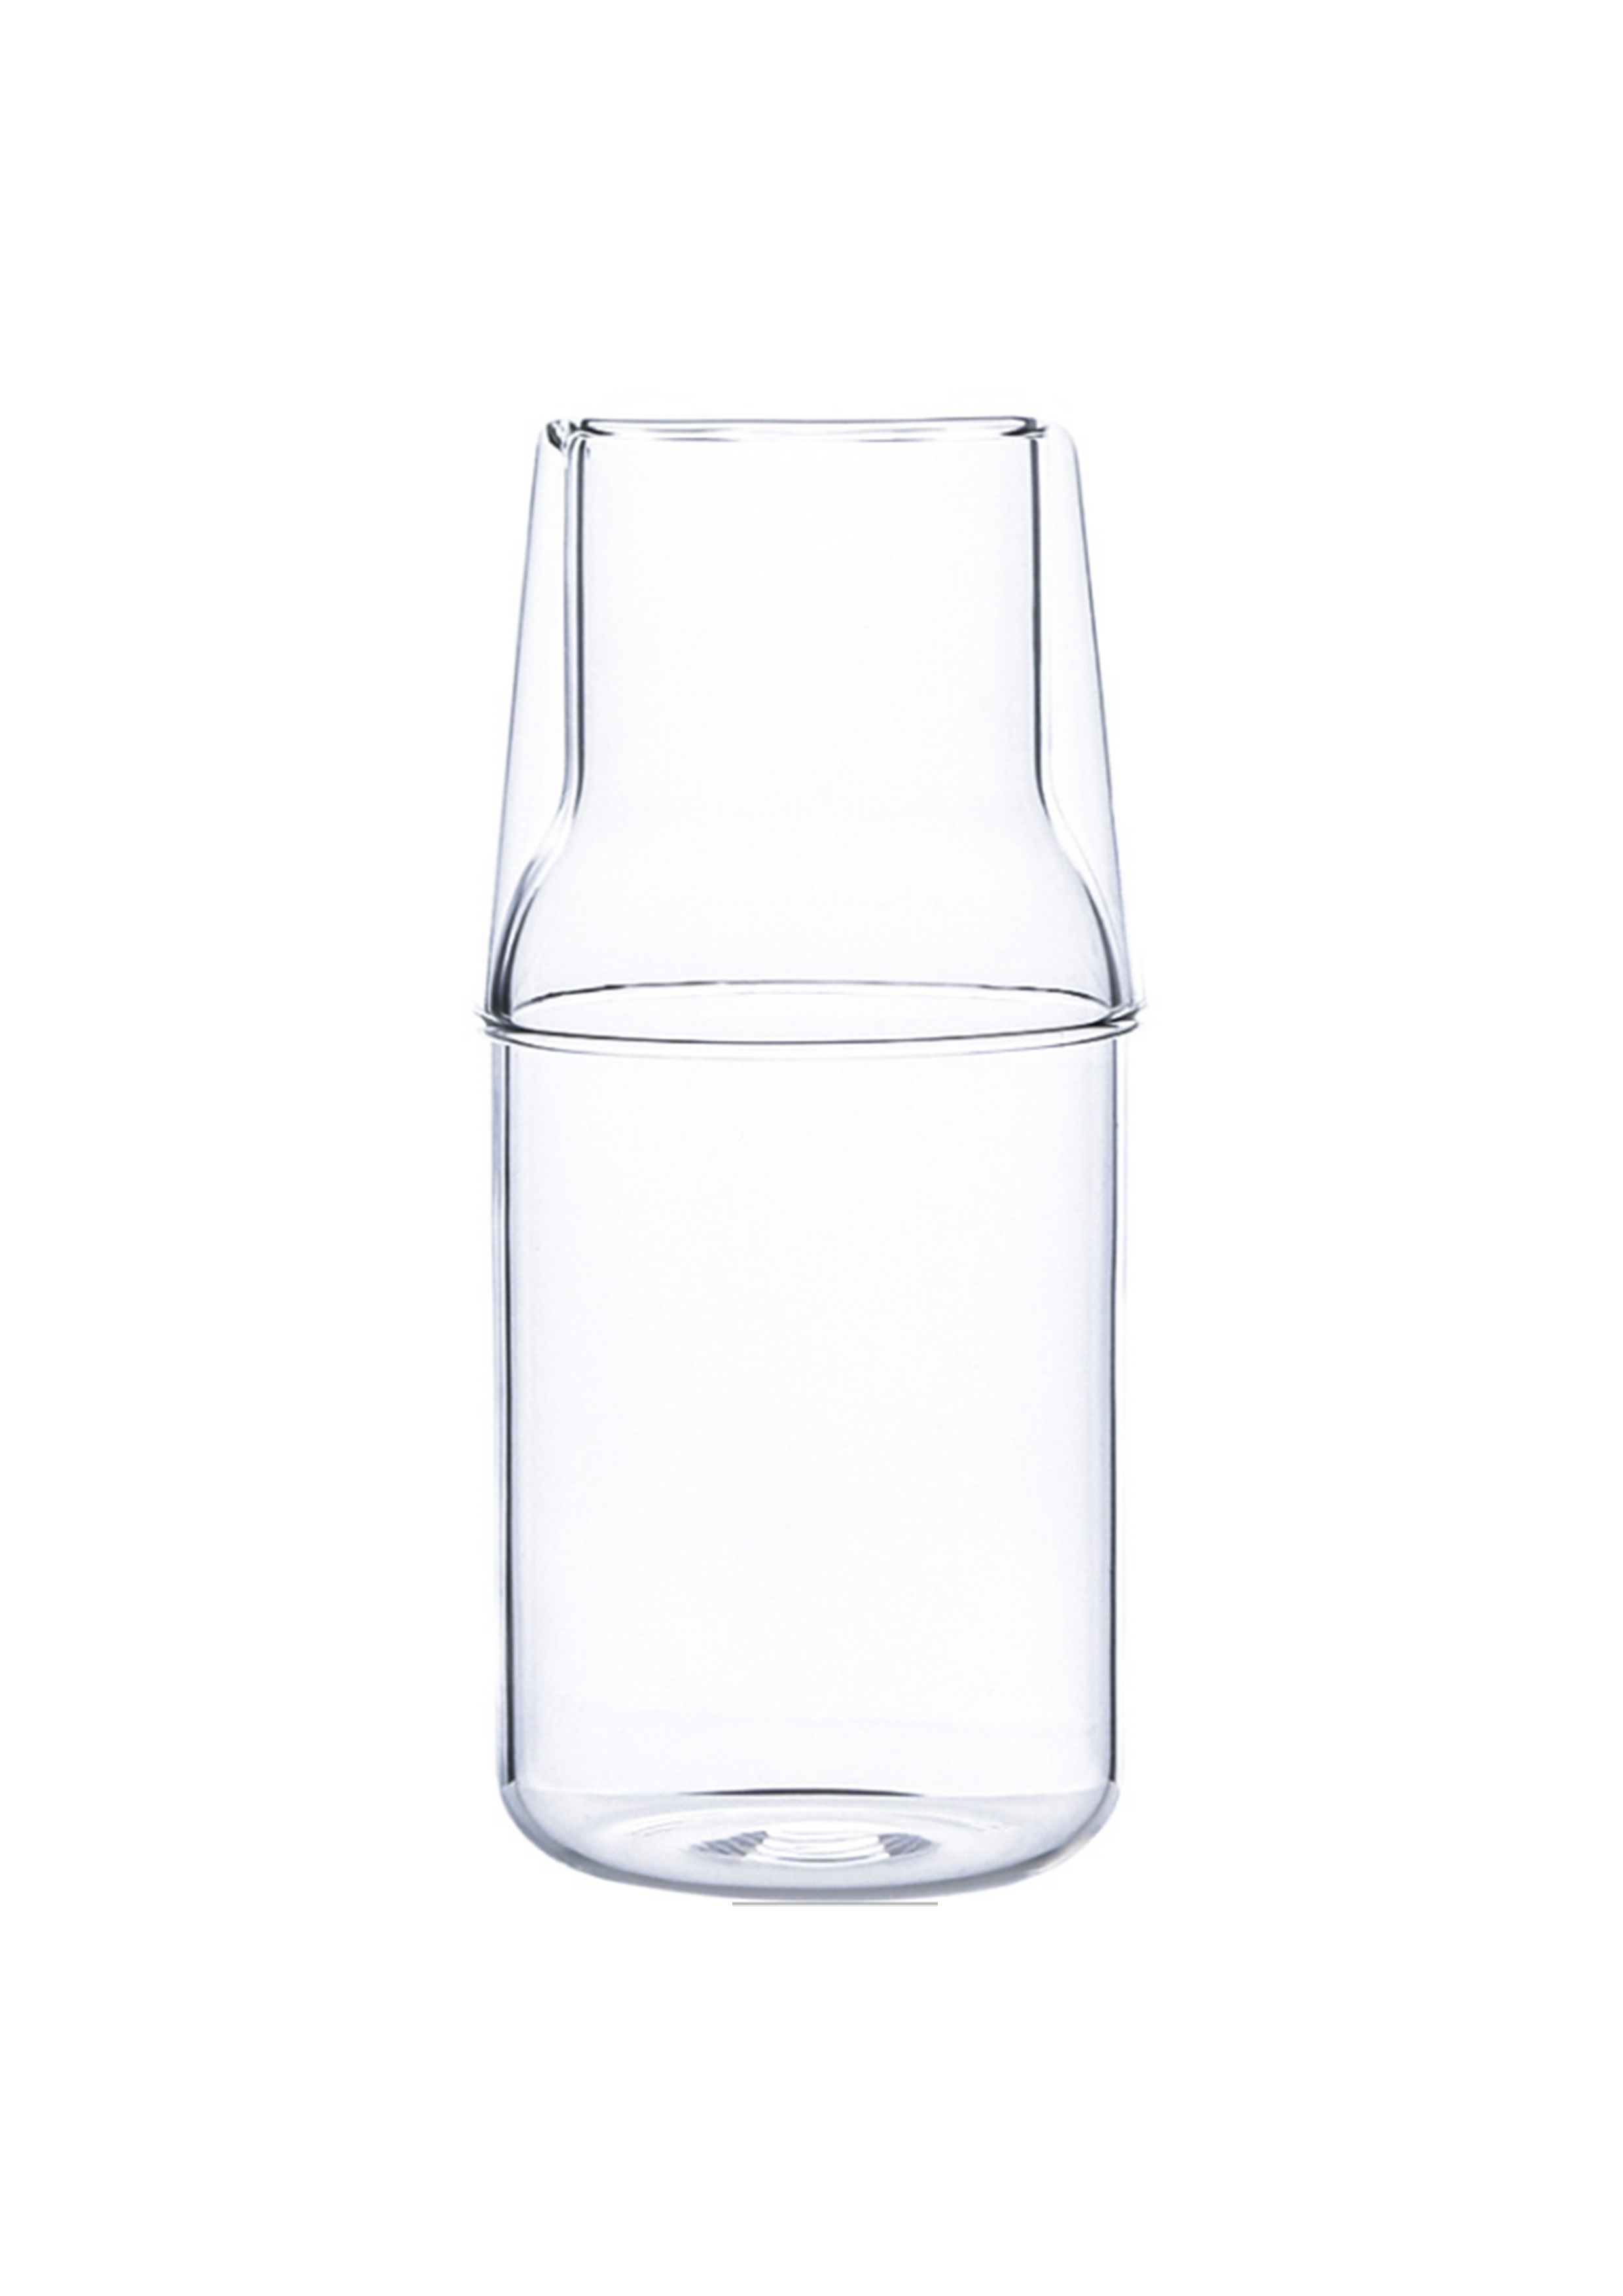 2019 China New Design Jar Glass - 400ml 550ml glass bottle juice carafe with cup carafe high borosilicate  – Credible